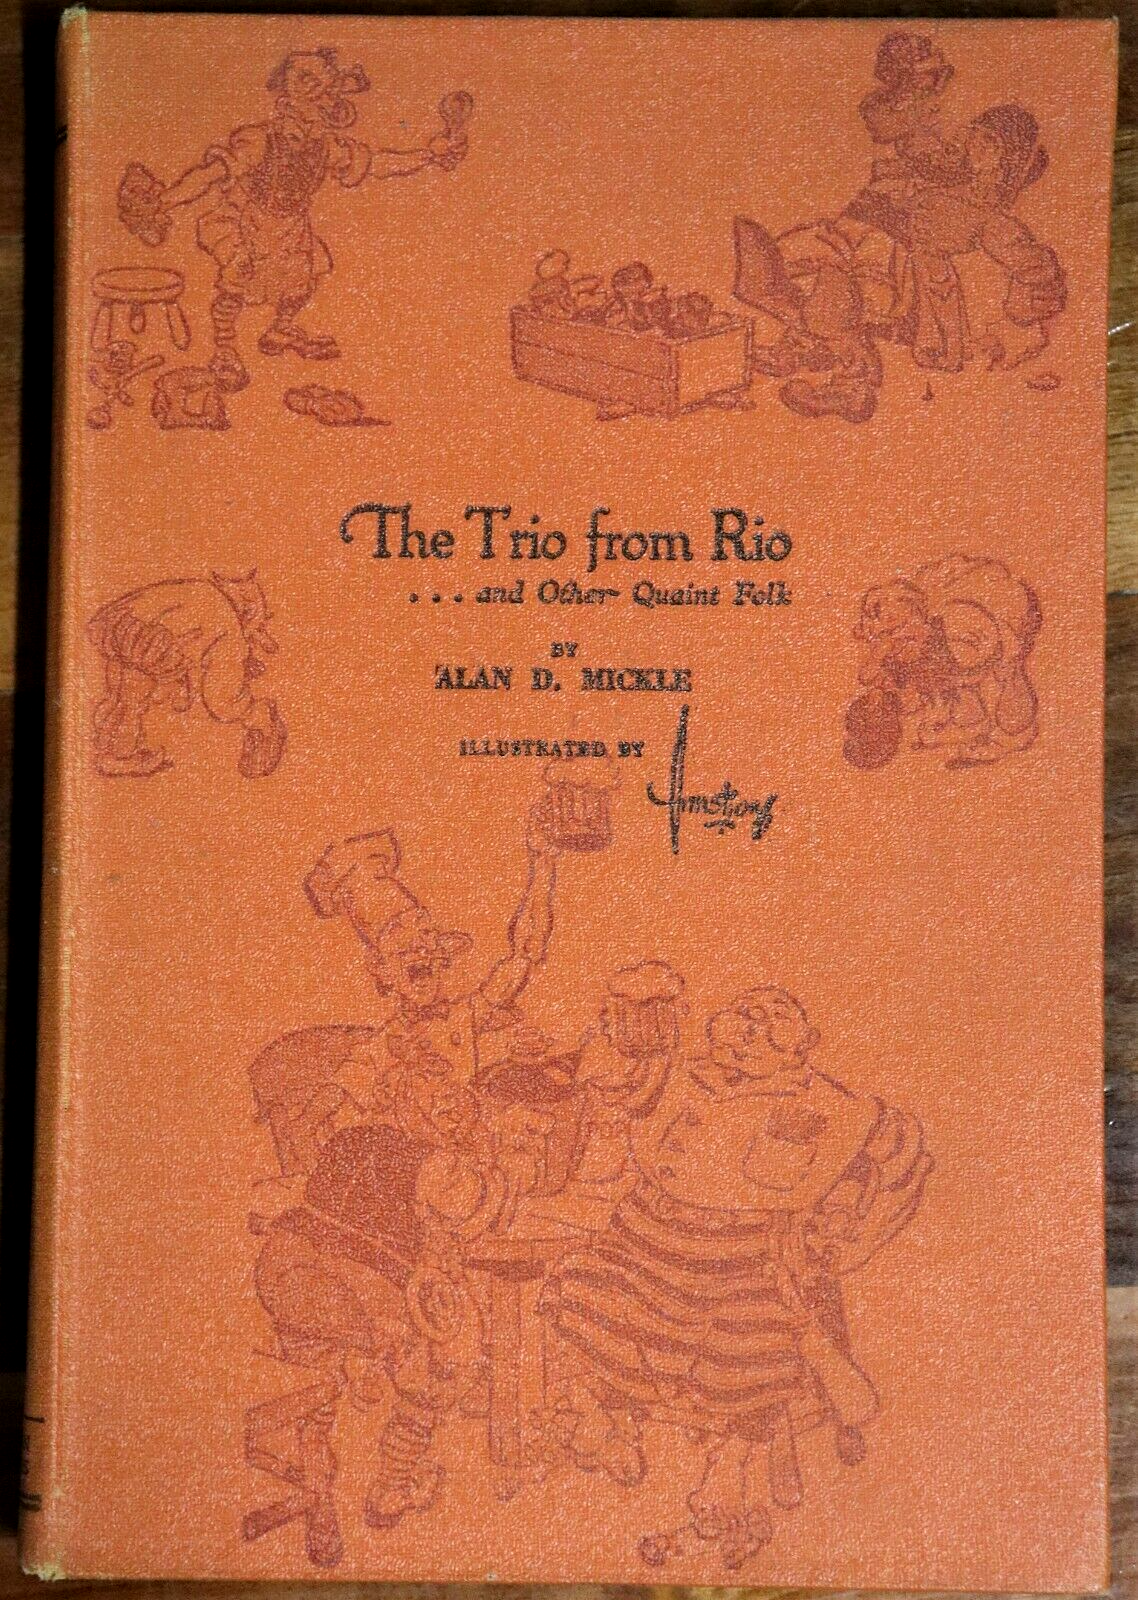 1942 The Trio From Rio by A. Mickle 1st Edition Australian Fiction Book